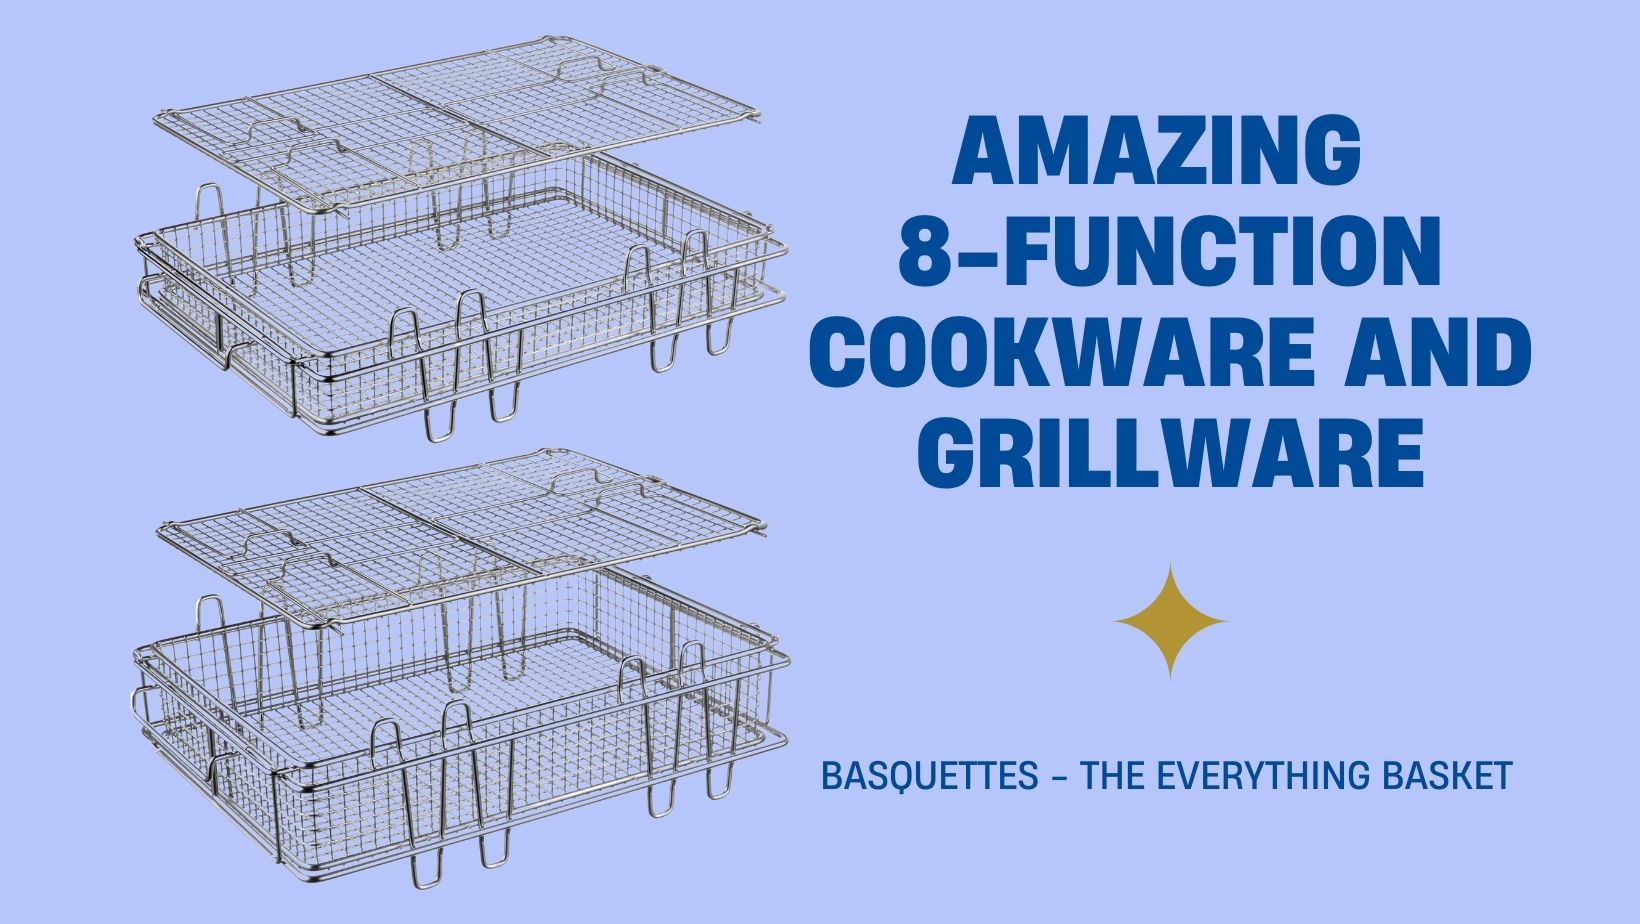 Basquettes is a multi-use oven and grill tool